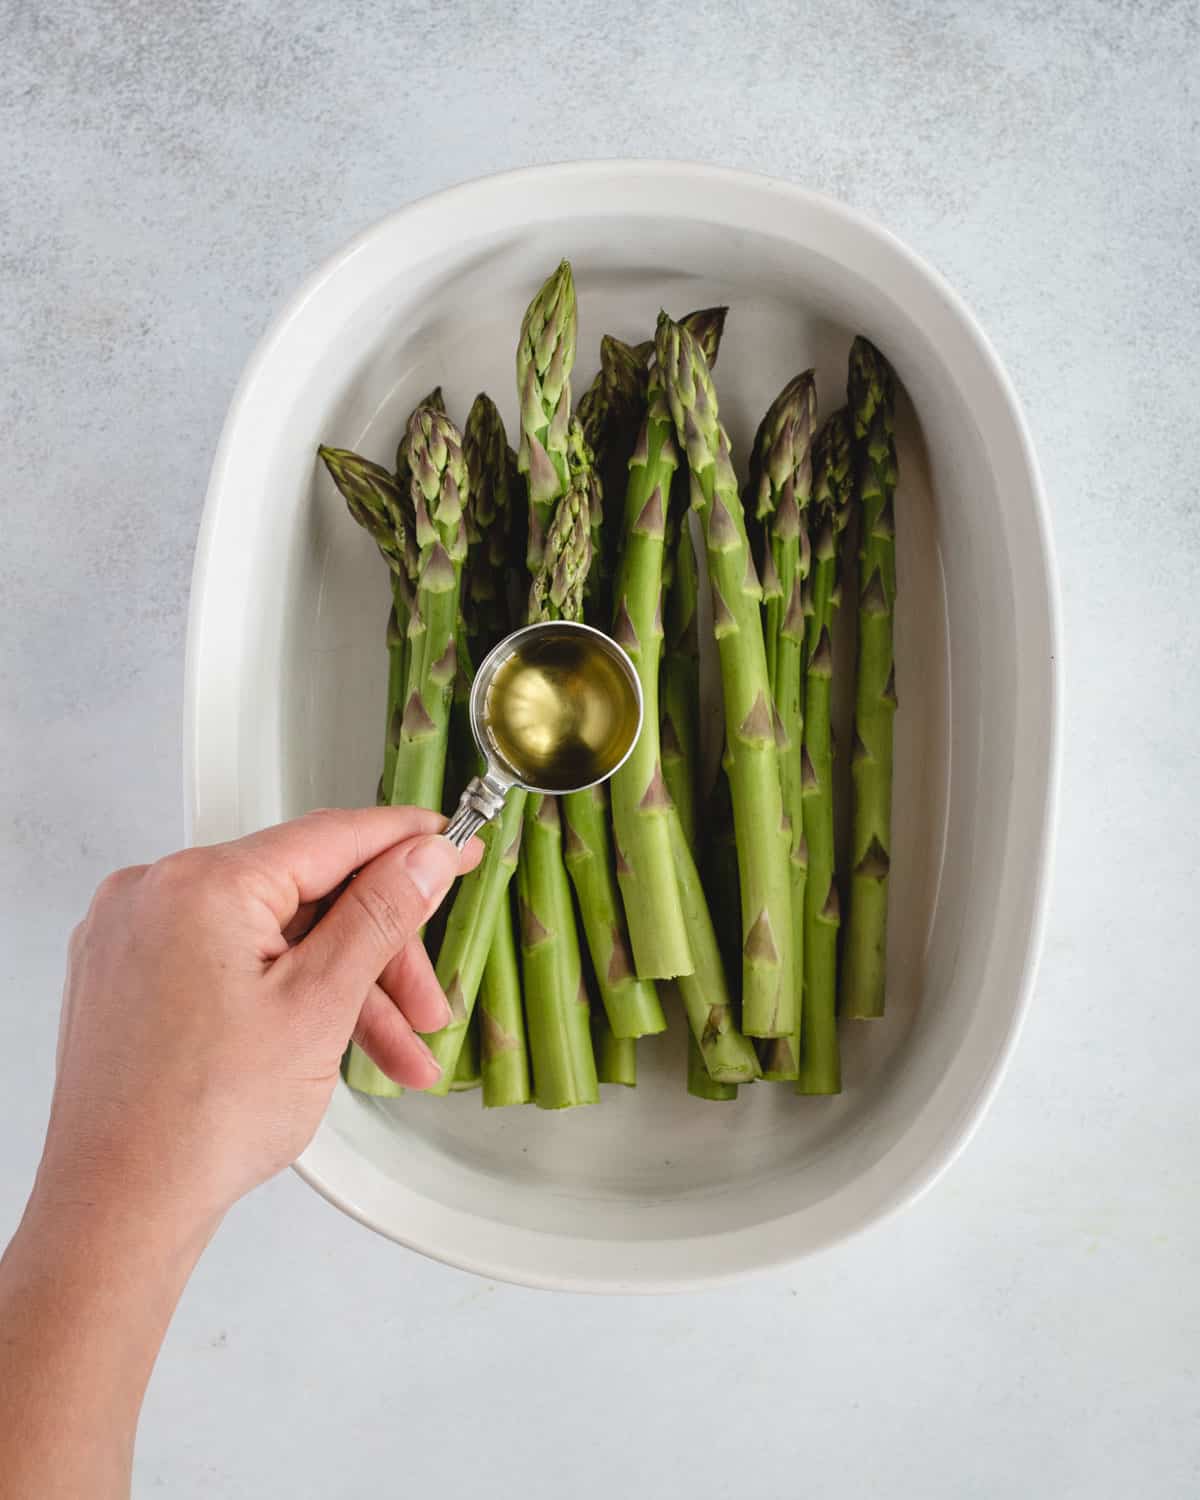 hand holding measuring spoon full of oil over asparagus in a bowl